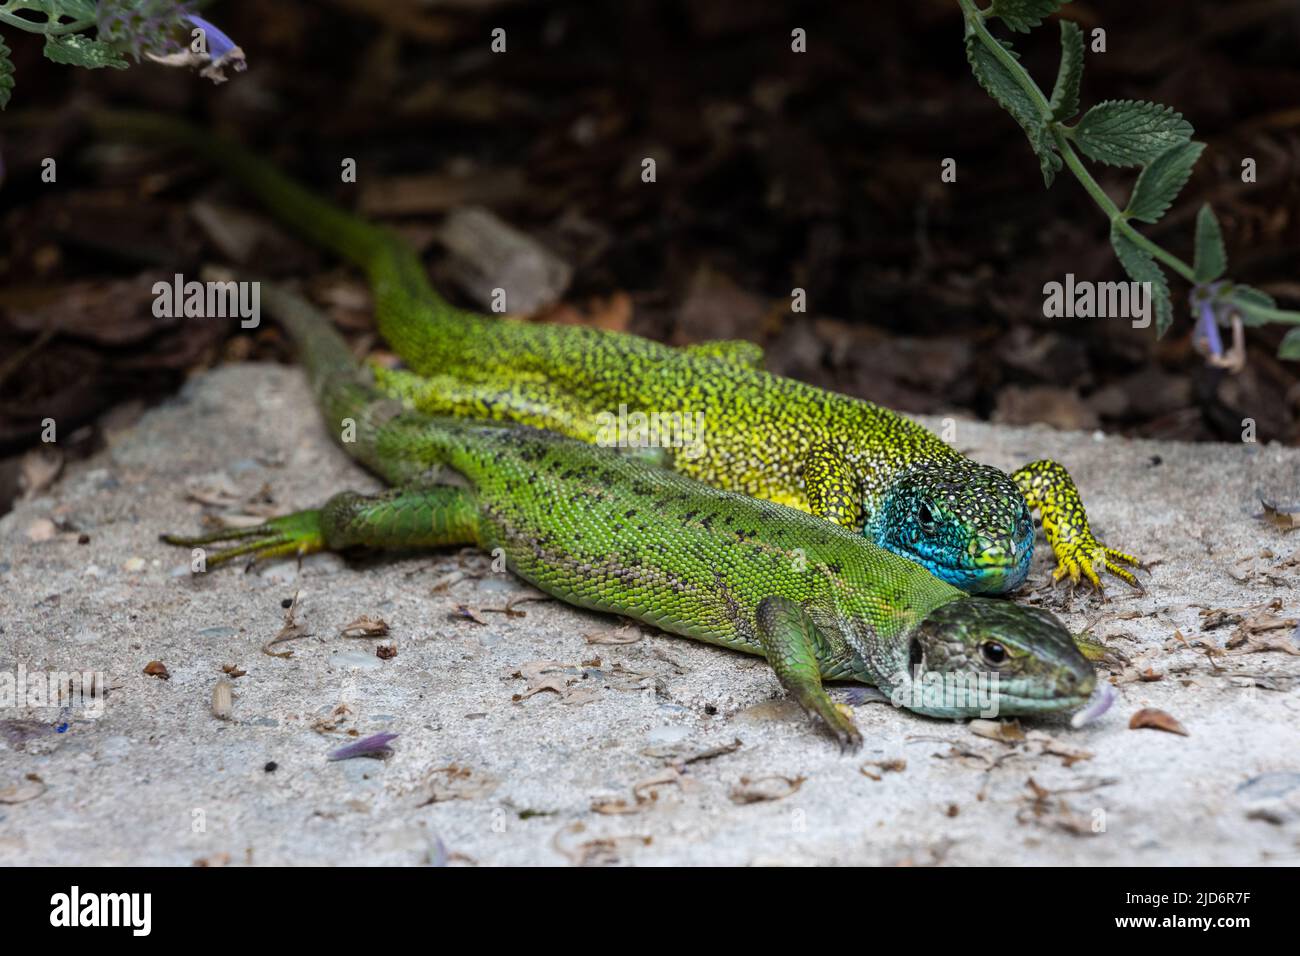 Close-up of a male and female green lizard couple (Lacerta bilineata or Lacerta vivipara, Smaragdeidechse) side by side on a stone. Focus on male liza Stock Photo